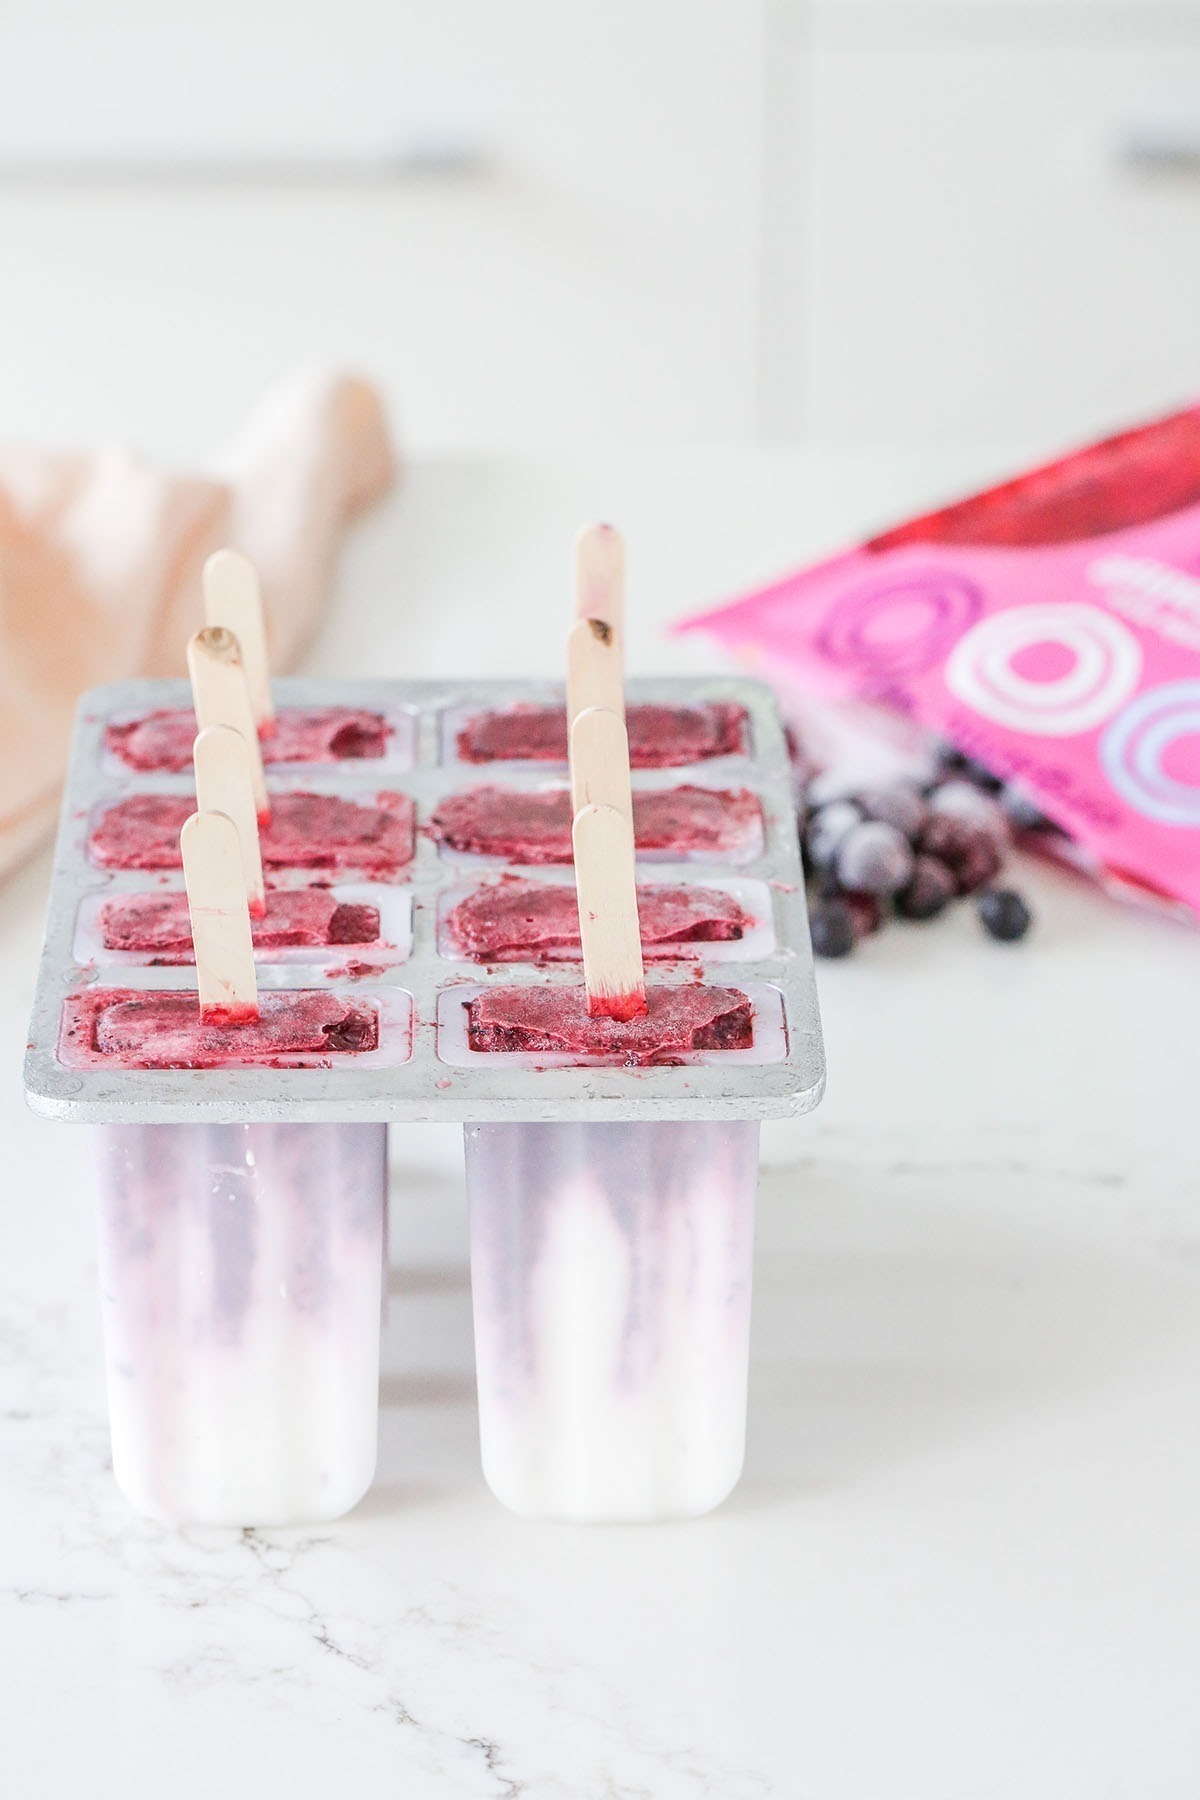 Fresh berries and dairy free coconut yoghurt, blended into an easy 5 minute, 5 ingredient ice cream popsicle. Good for the kids, and adults too! Healthy, easy, and super low in sugar.